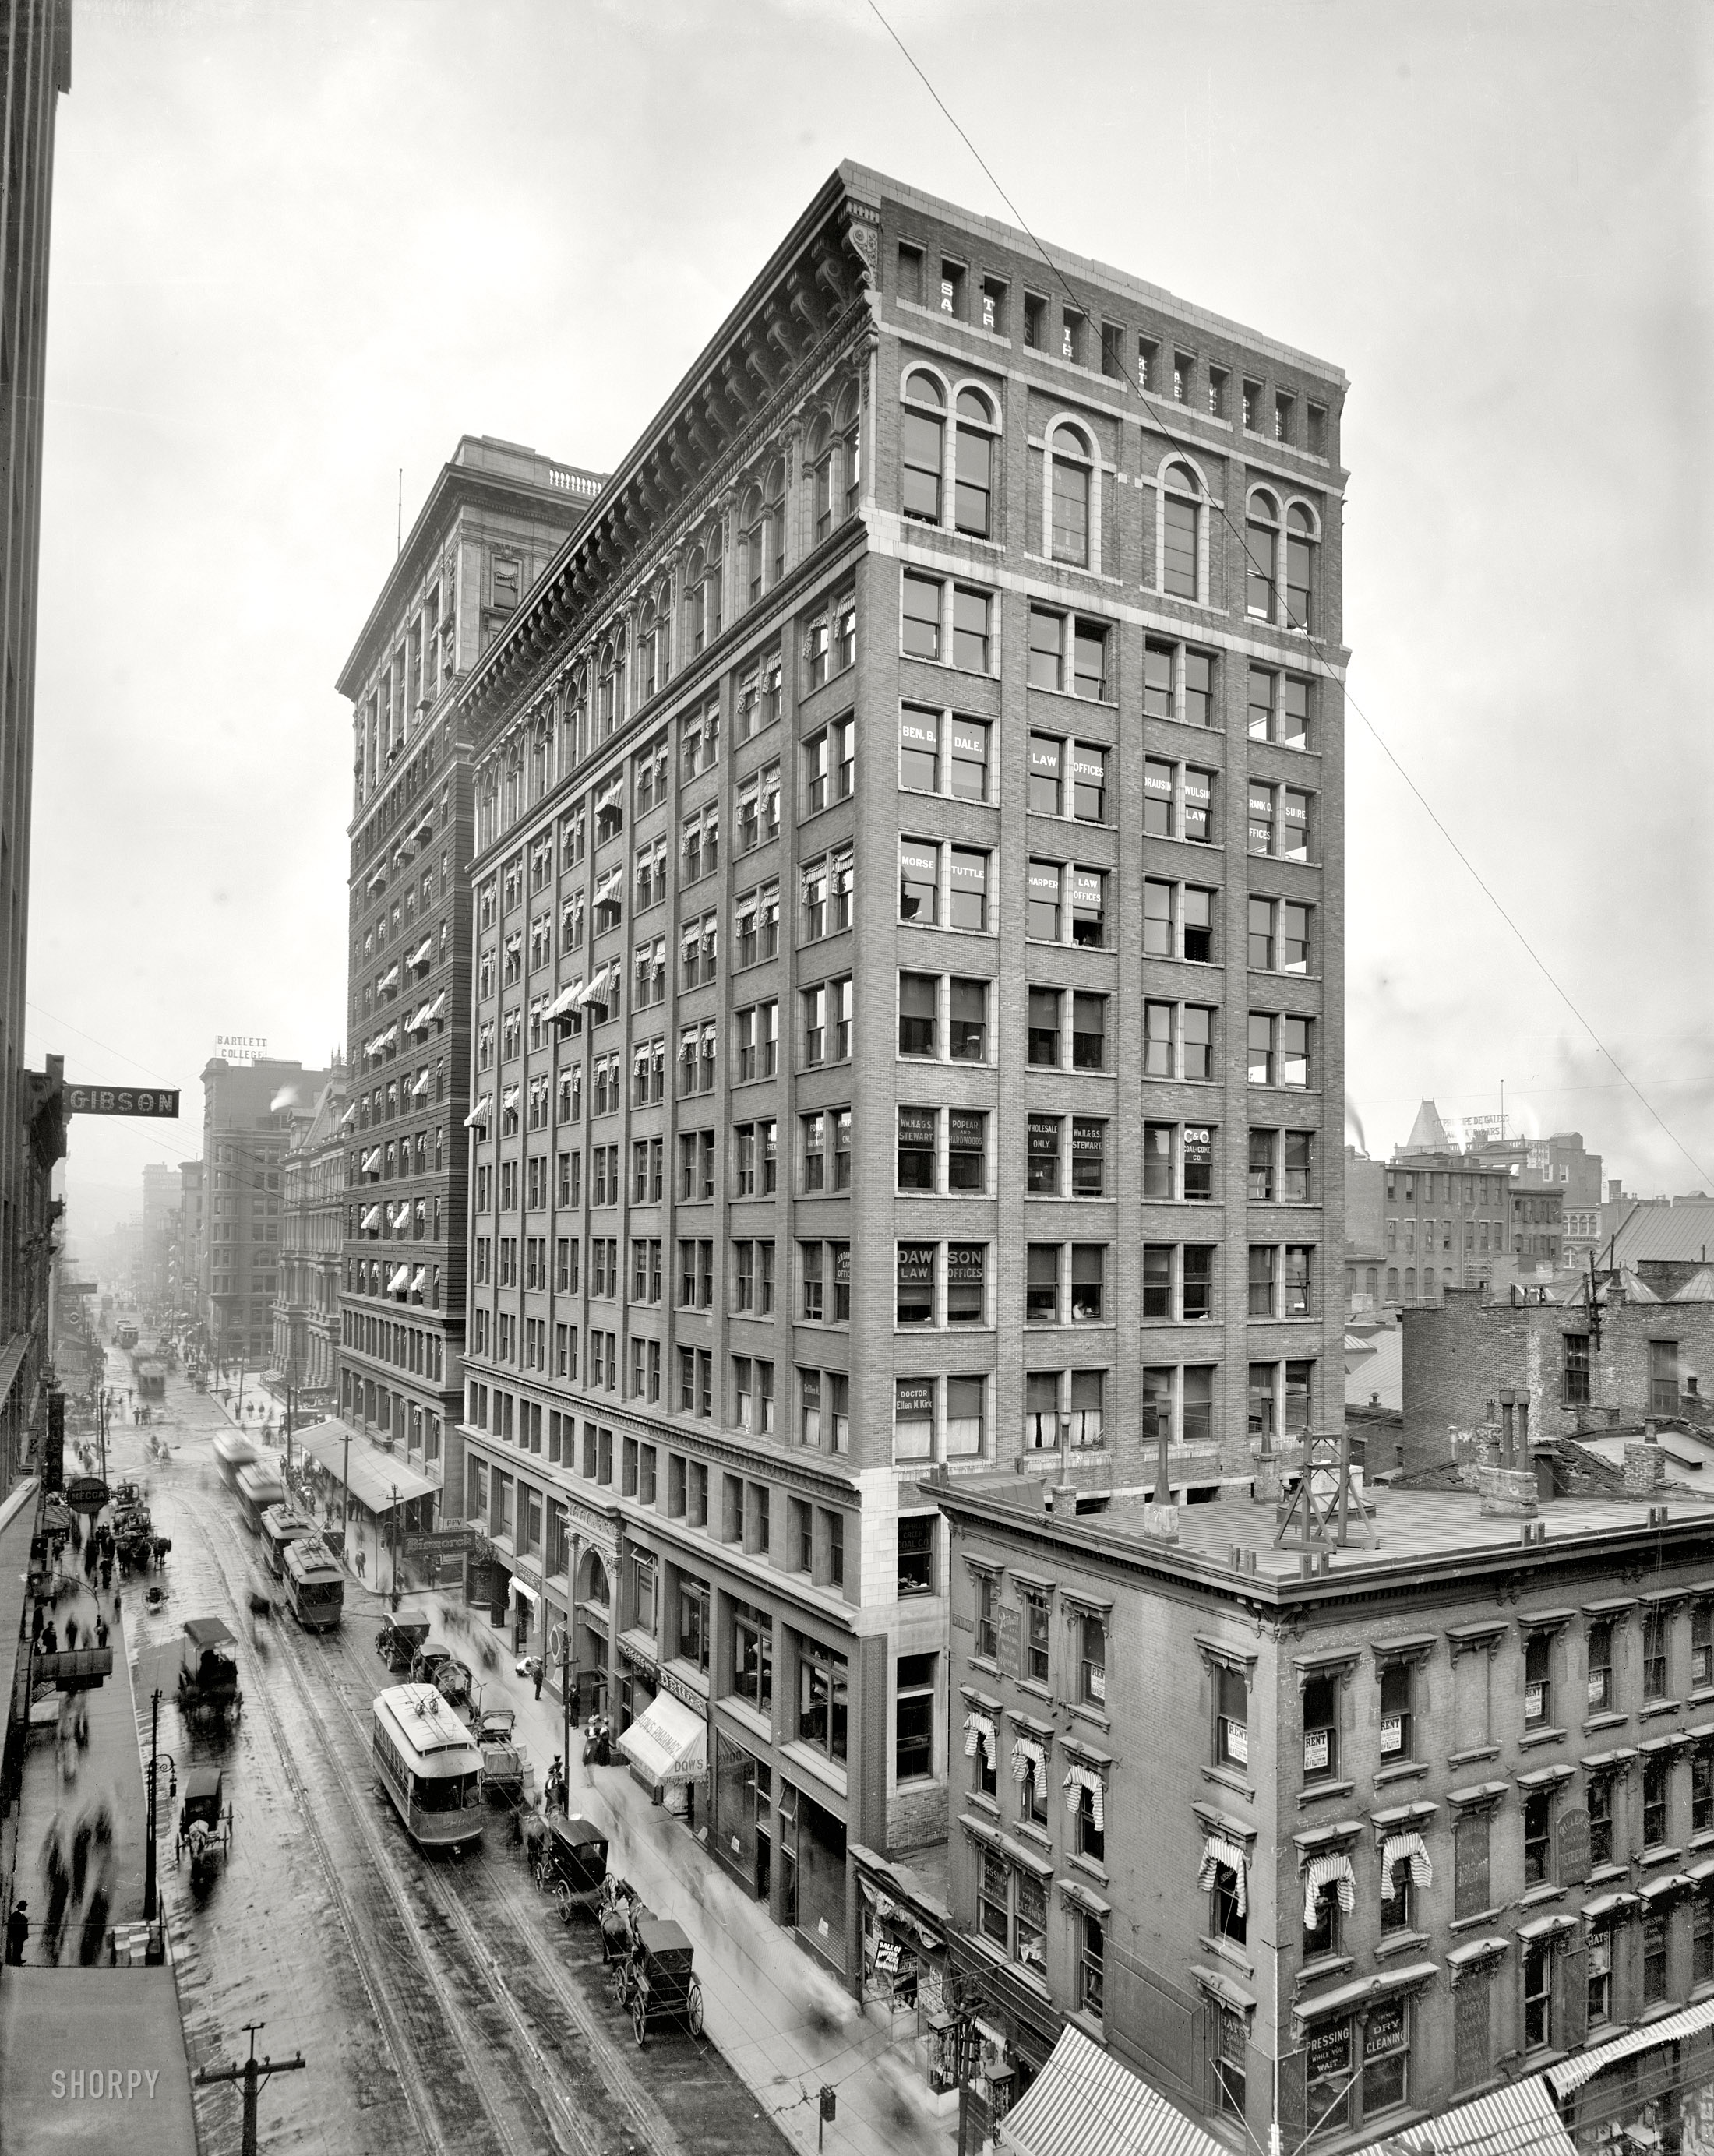 Cincinnati circa 1910. "Mercantile Library Building, Walnut Street." Note plants and bottle on the sills of Dr. Ellen M. Kirk. A year ago we saw the other end of this block here. 8x10 glass negative, Detroit Publishing Co. View full size.